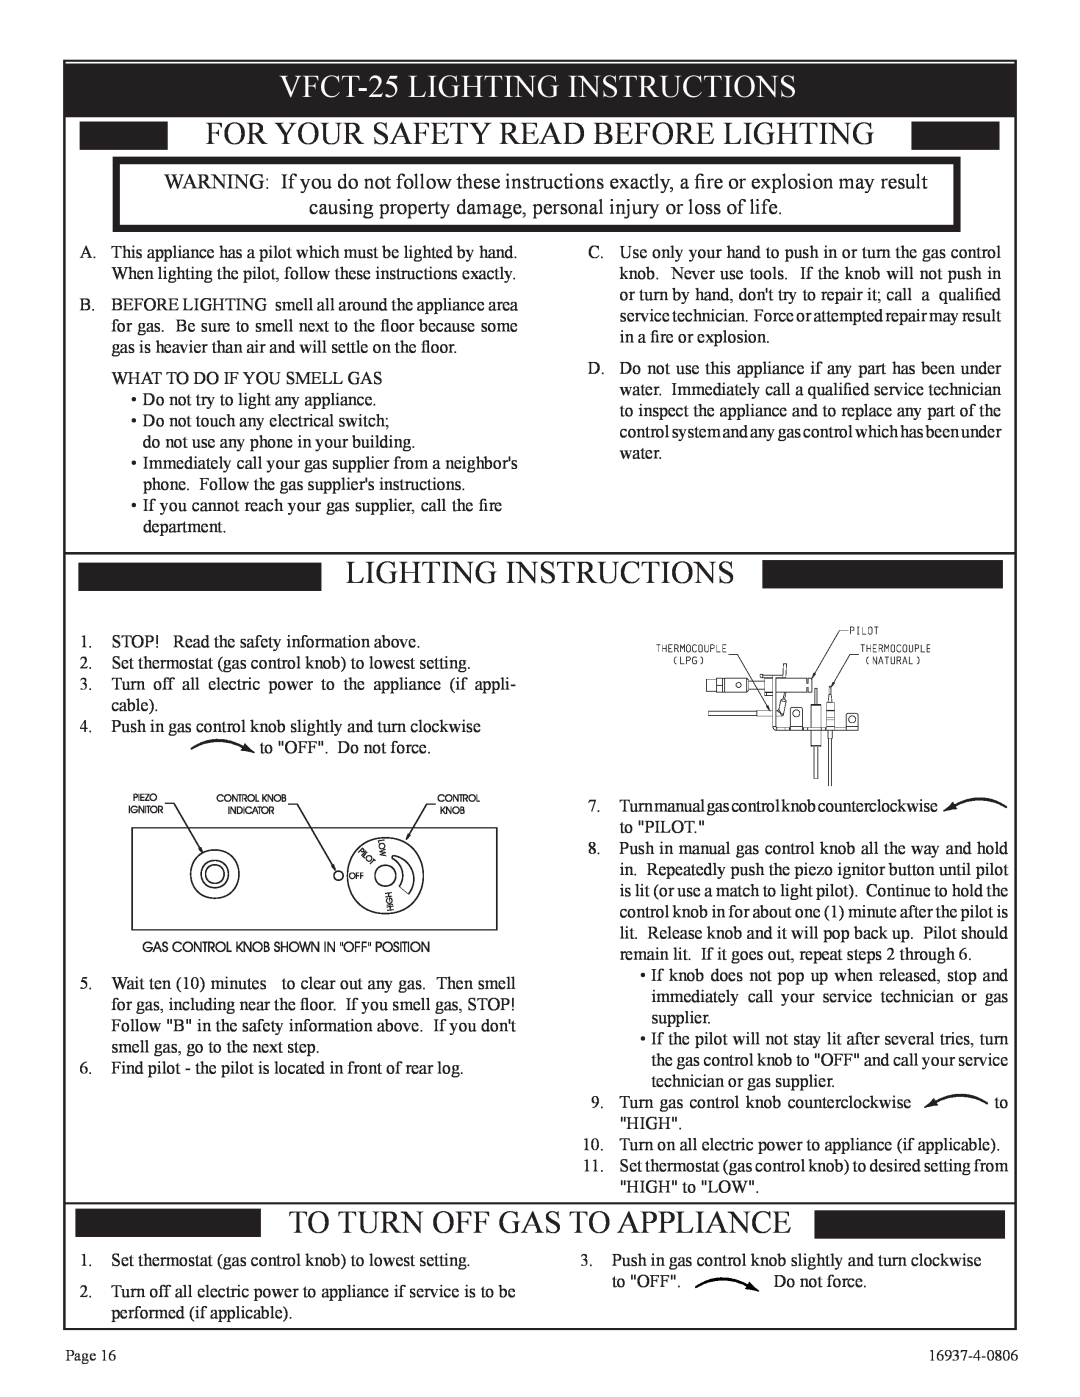 Empire Comfort Systems VFCT25-3 VFCT-25LIGHTING INSTRUCTIONS, For Your Safety Read Before Lighting, Lighting Instructions 